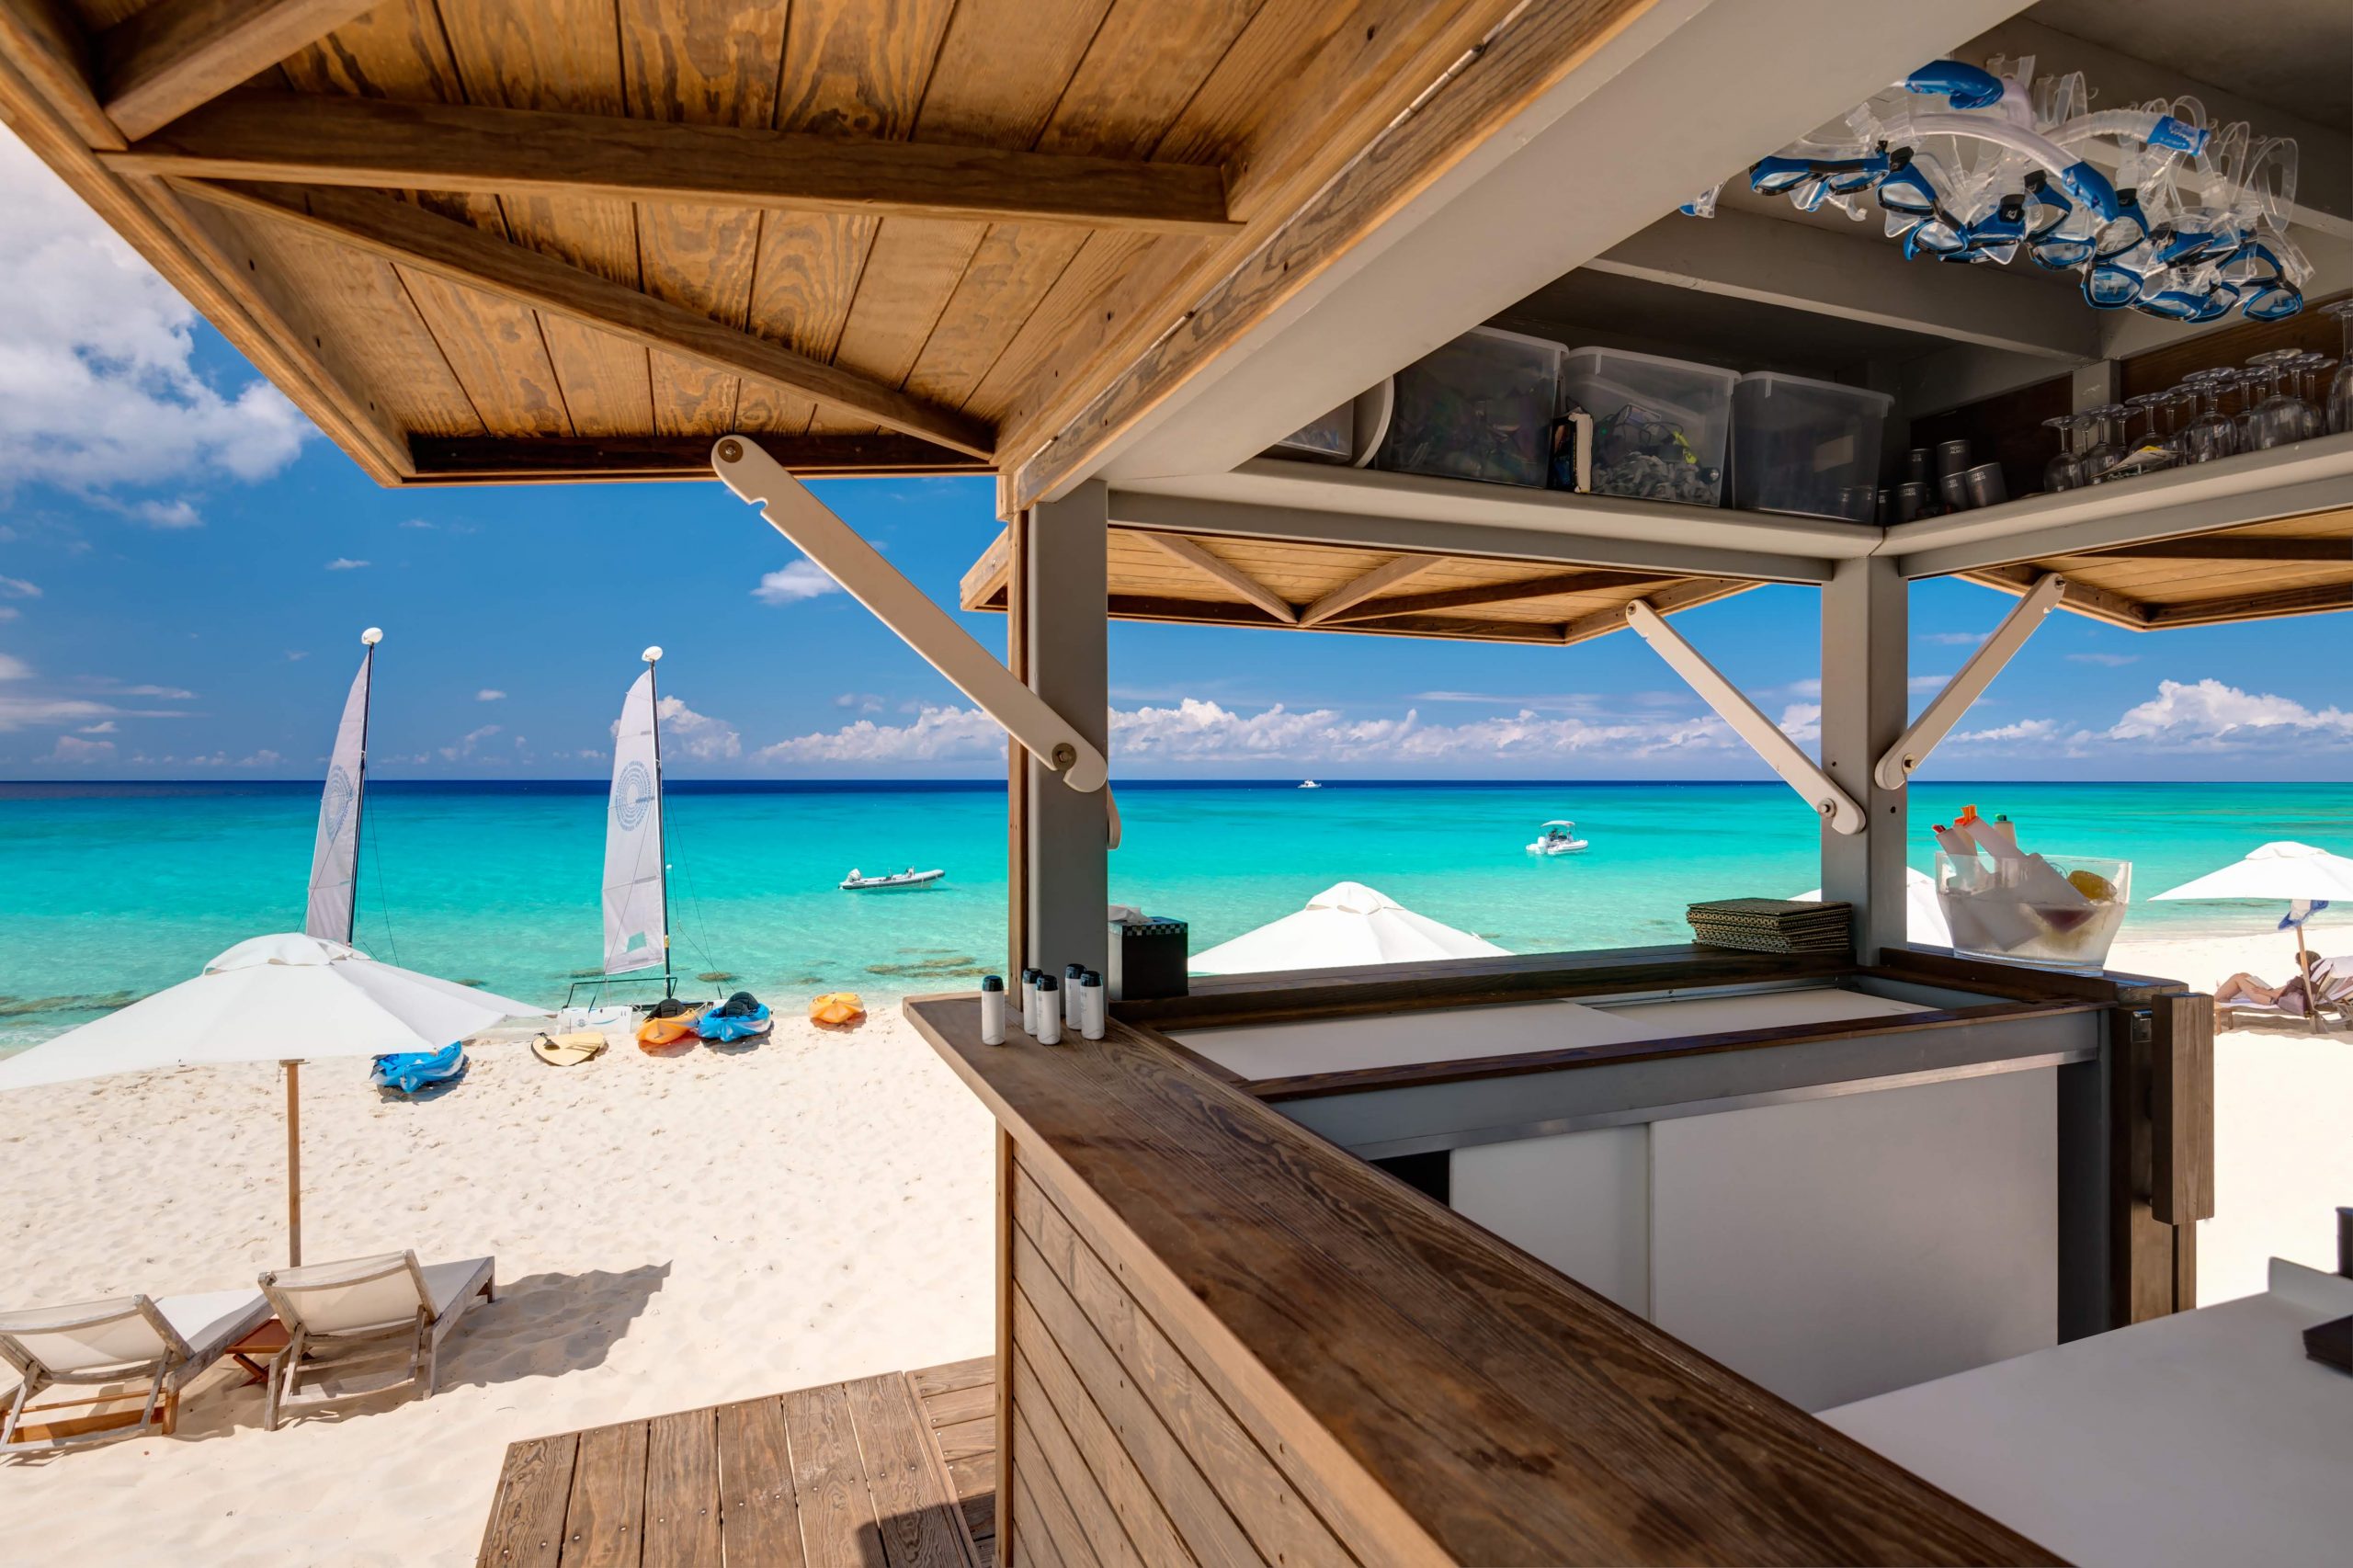 Under the awning of the Amanyara Resort Beach Hut in Turks & Caicos featuring Kebony Modified Wood Clear Cladding during the day and overlooking the beautiful blue ocean and pristine beach in the background